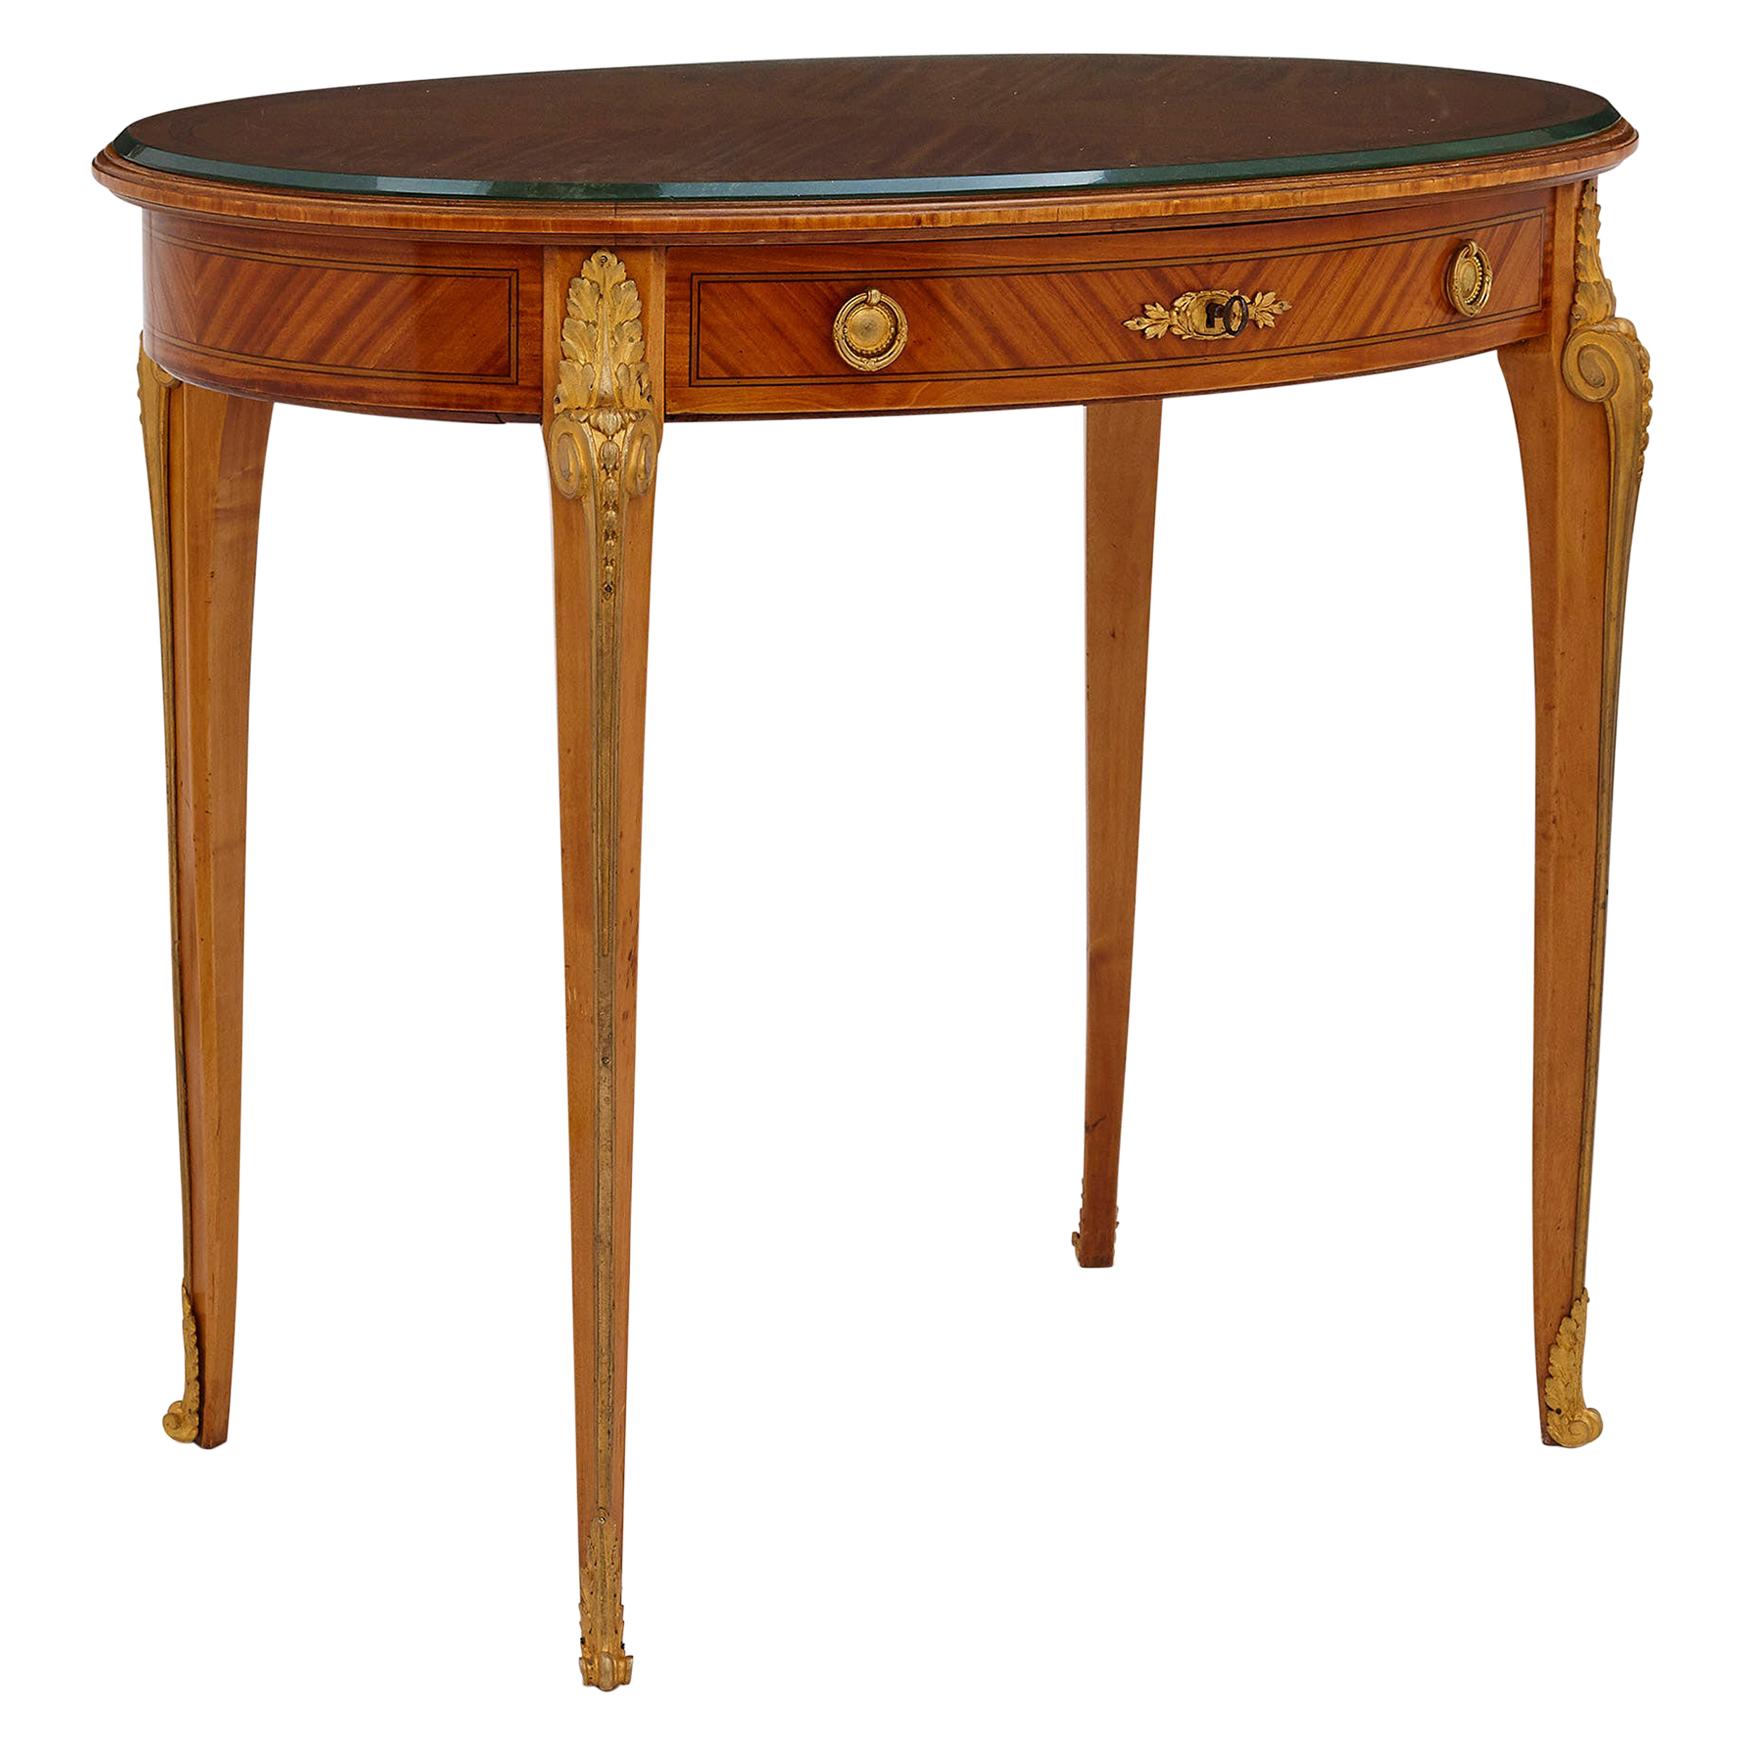 Antique Parisian Neoclassical Style Side Table by Au Gros Chêne For Sale